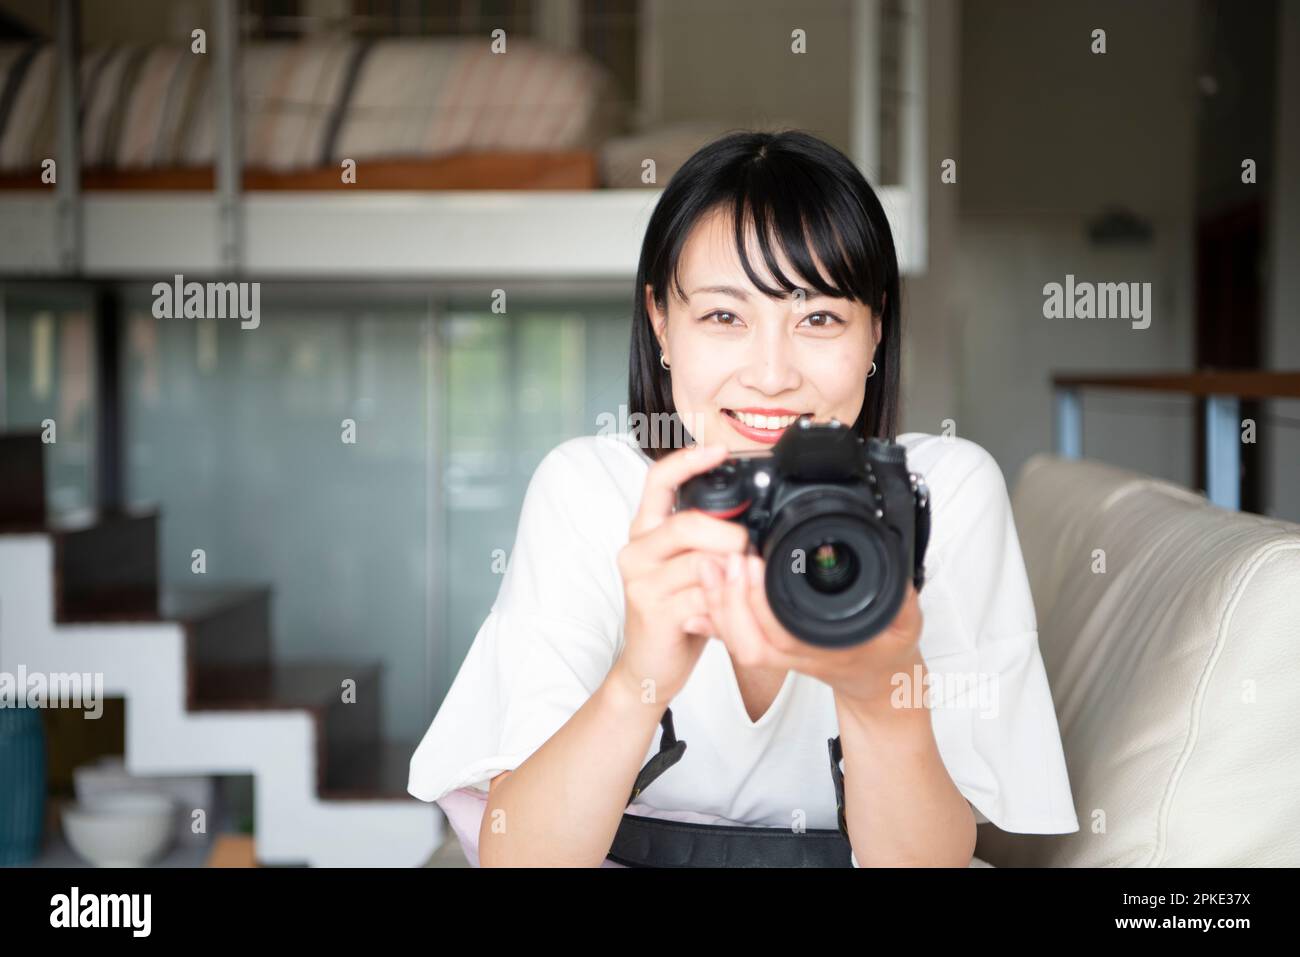 Woman holding SLR camera and smiling Stock Photo